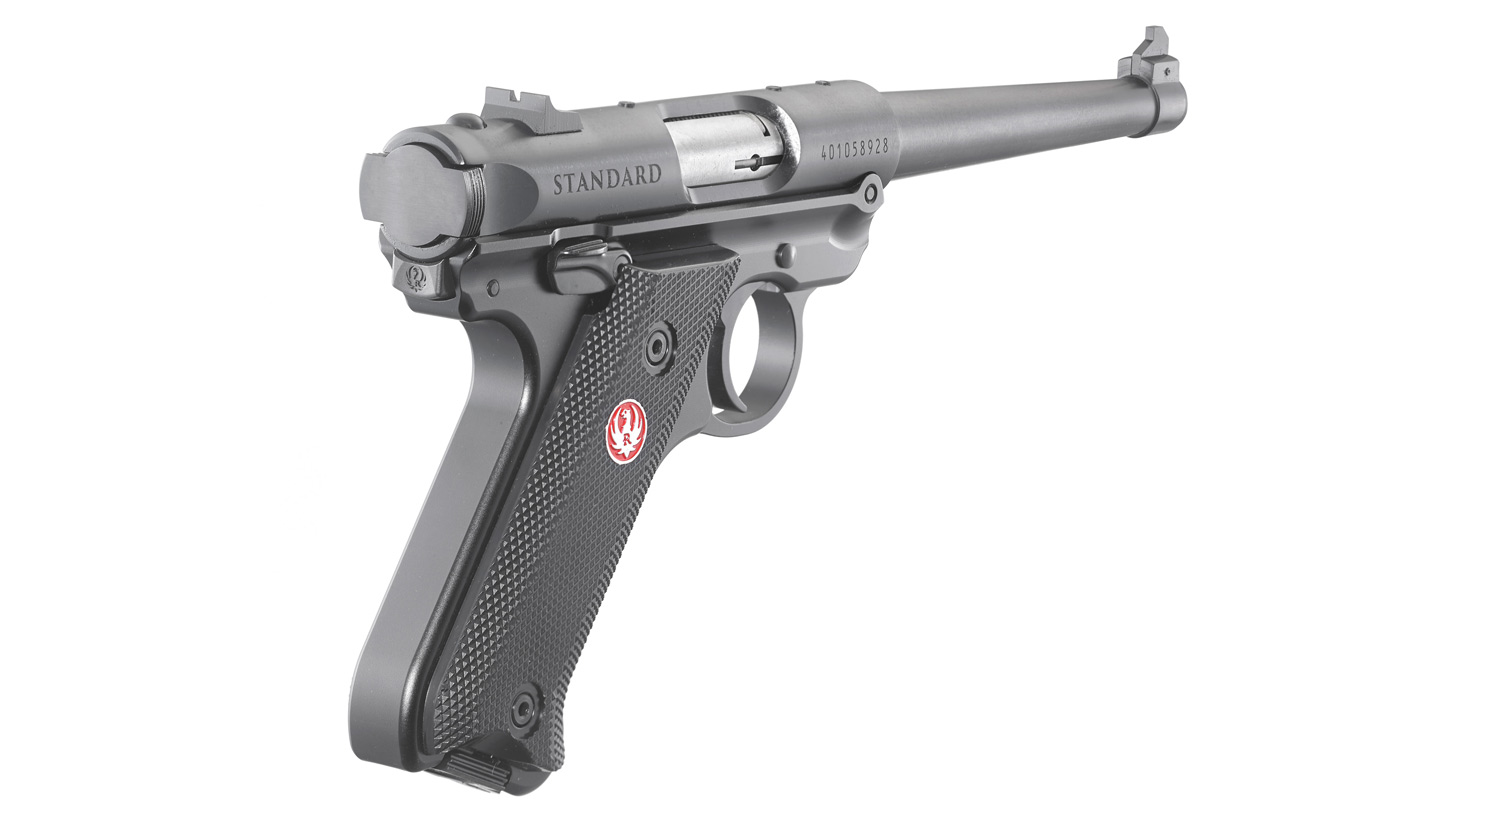 [Linked Image from ruger.com]